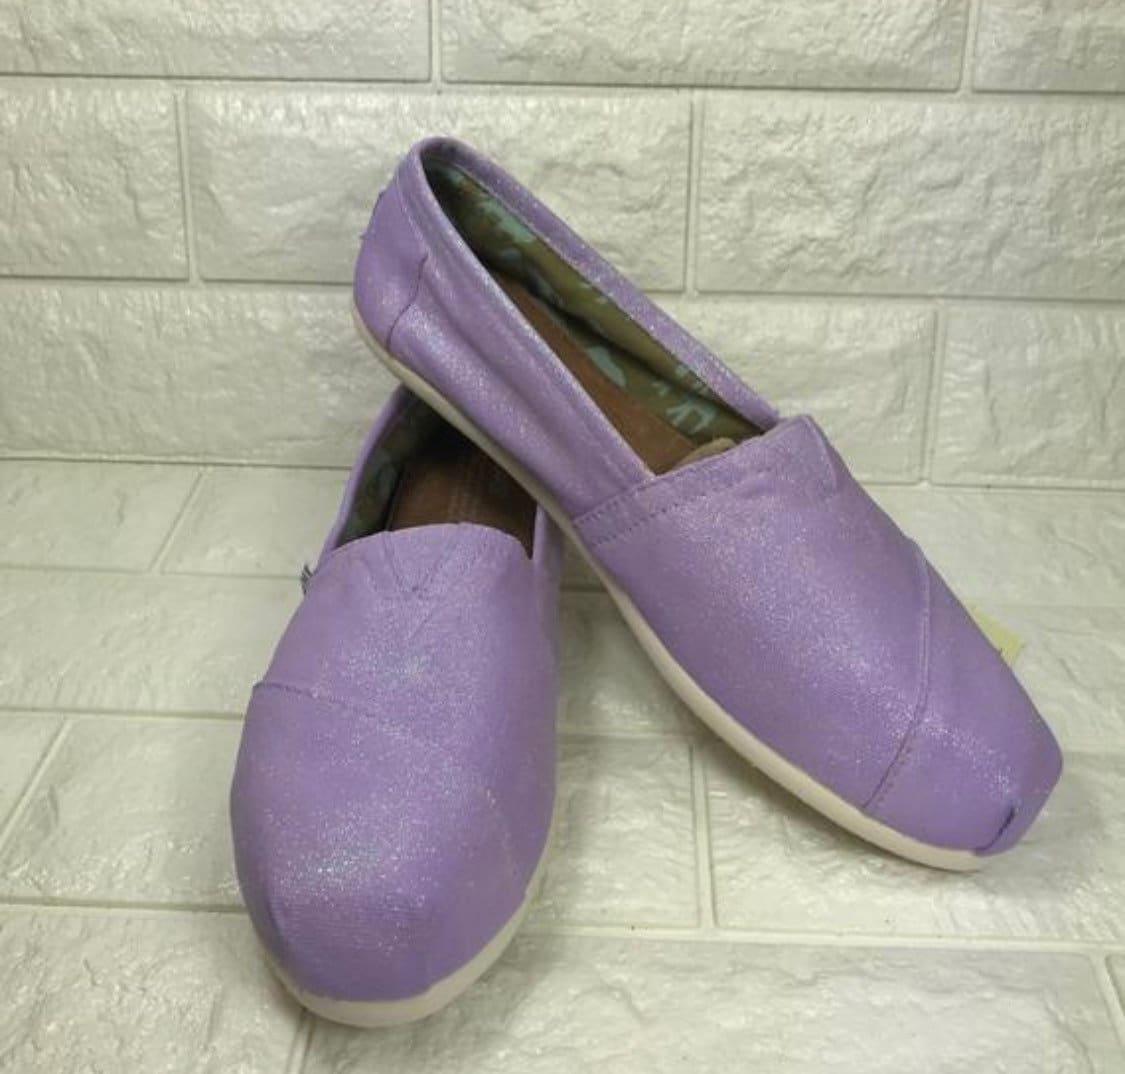 Lavender Glitter Shoes - ButterMakesMeHappy